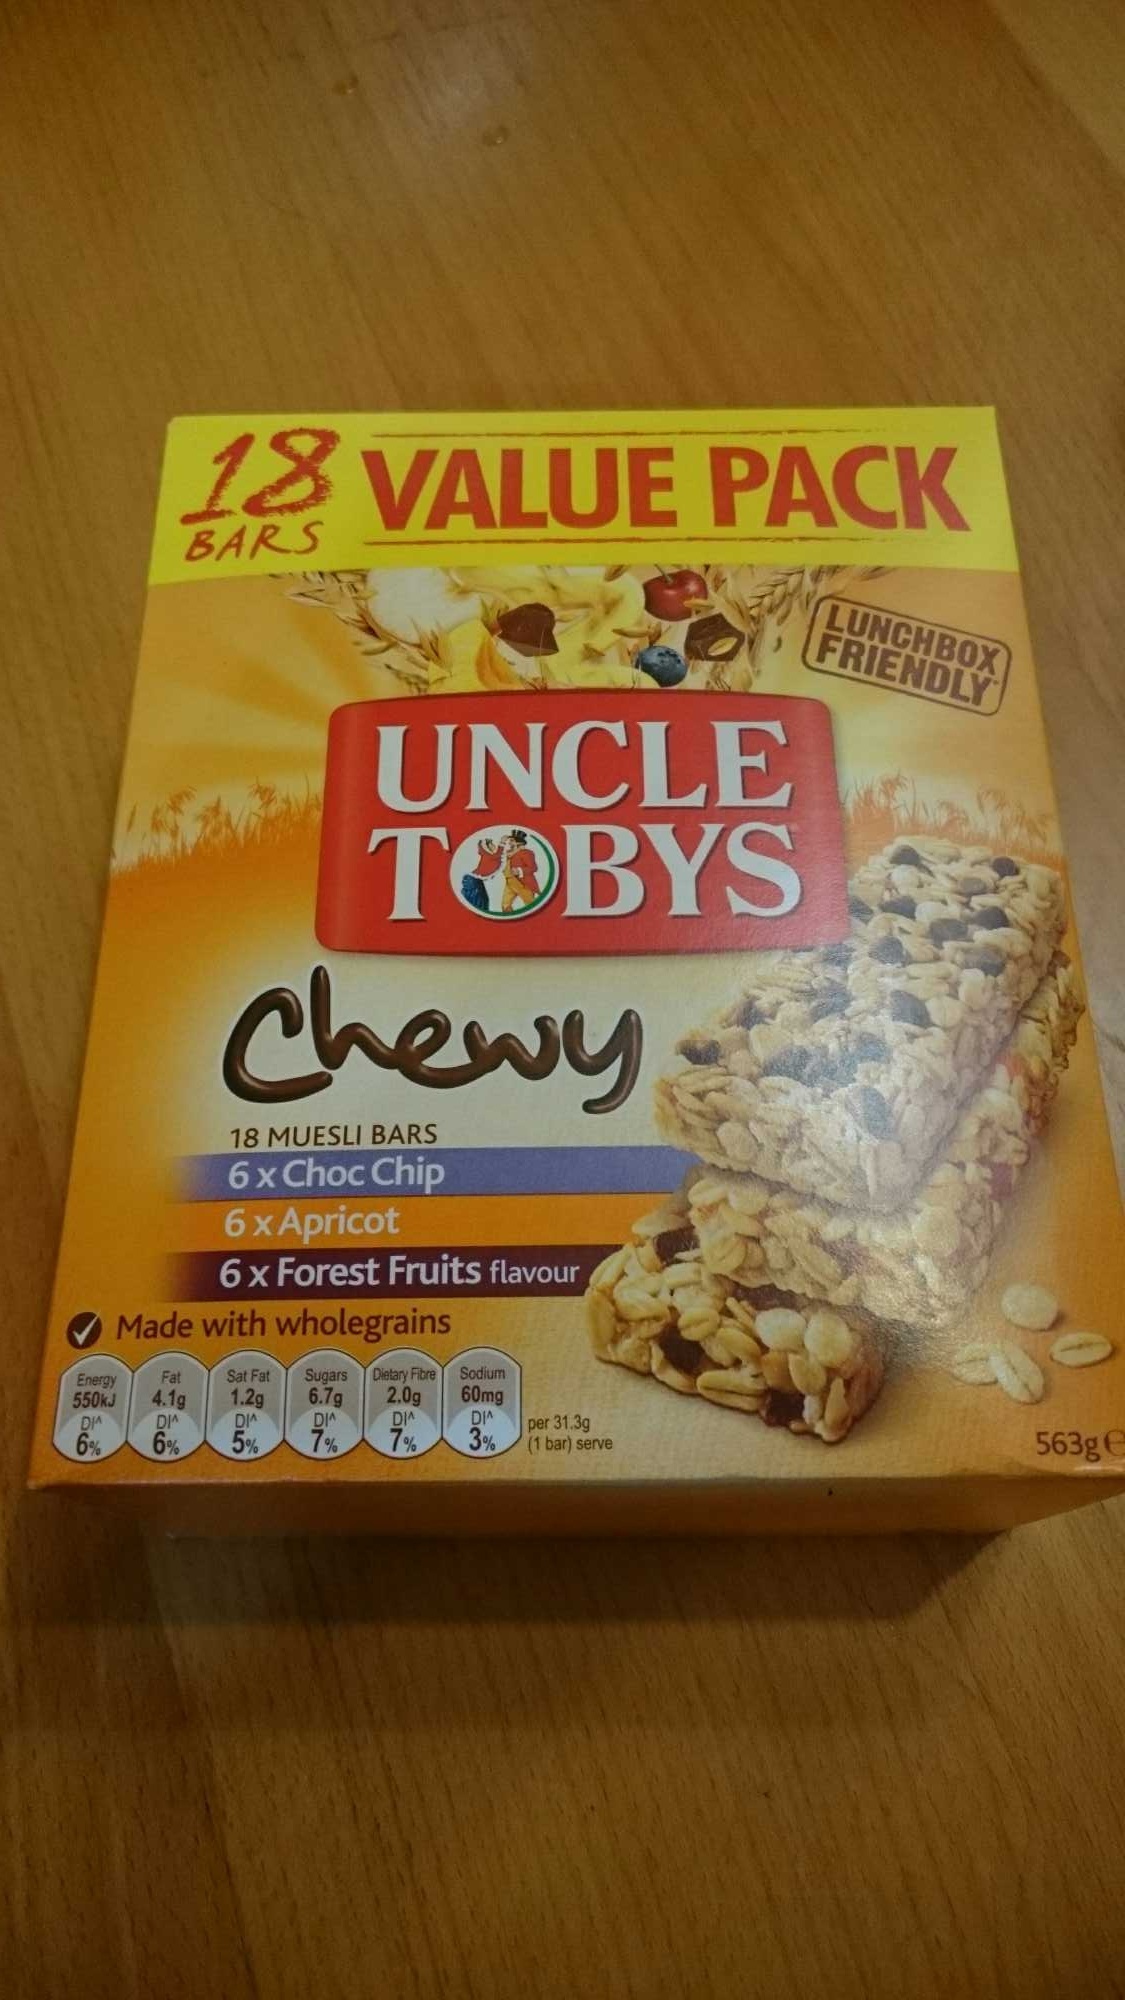 chewy mixed muesli bars 18 bar value pack - Product